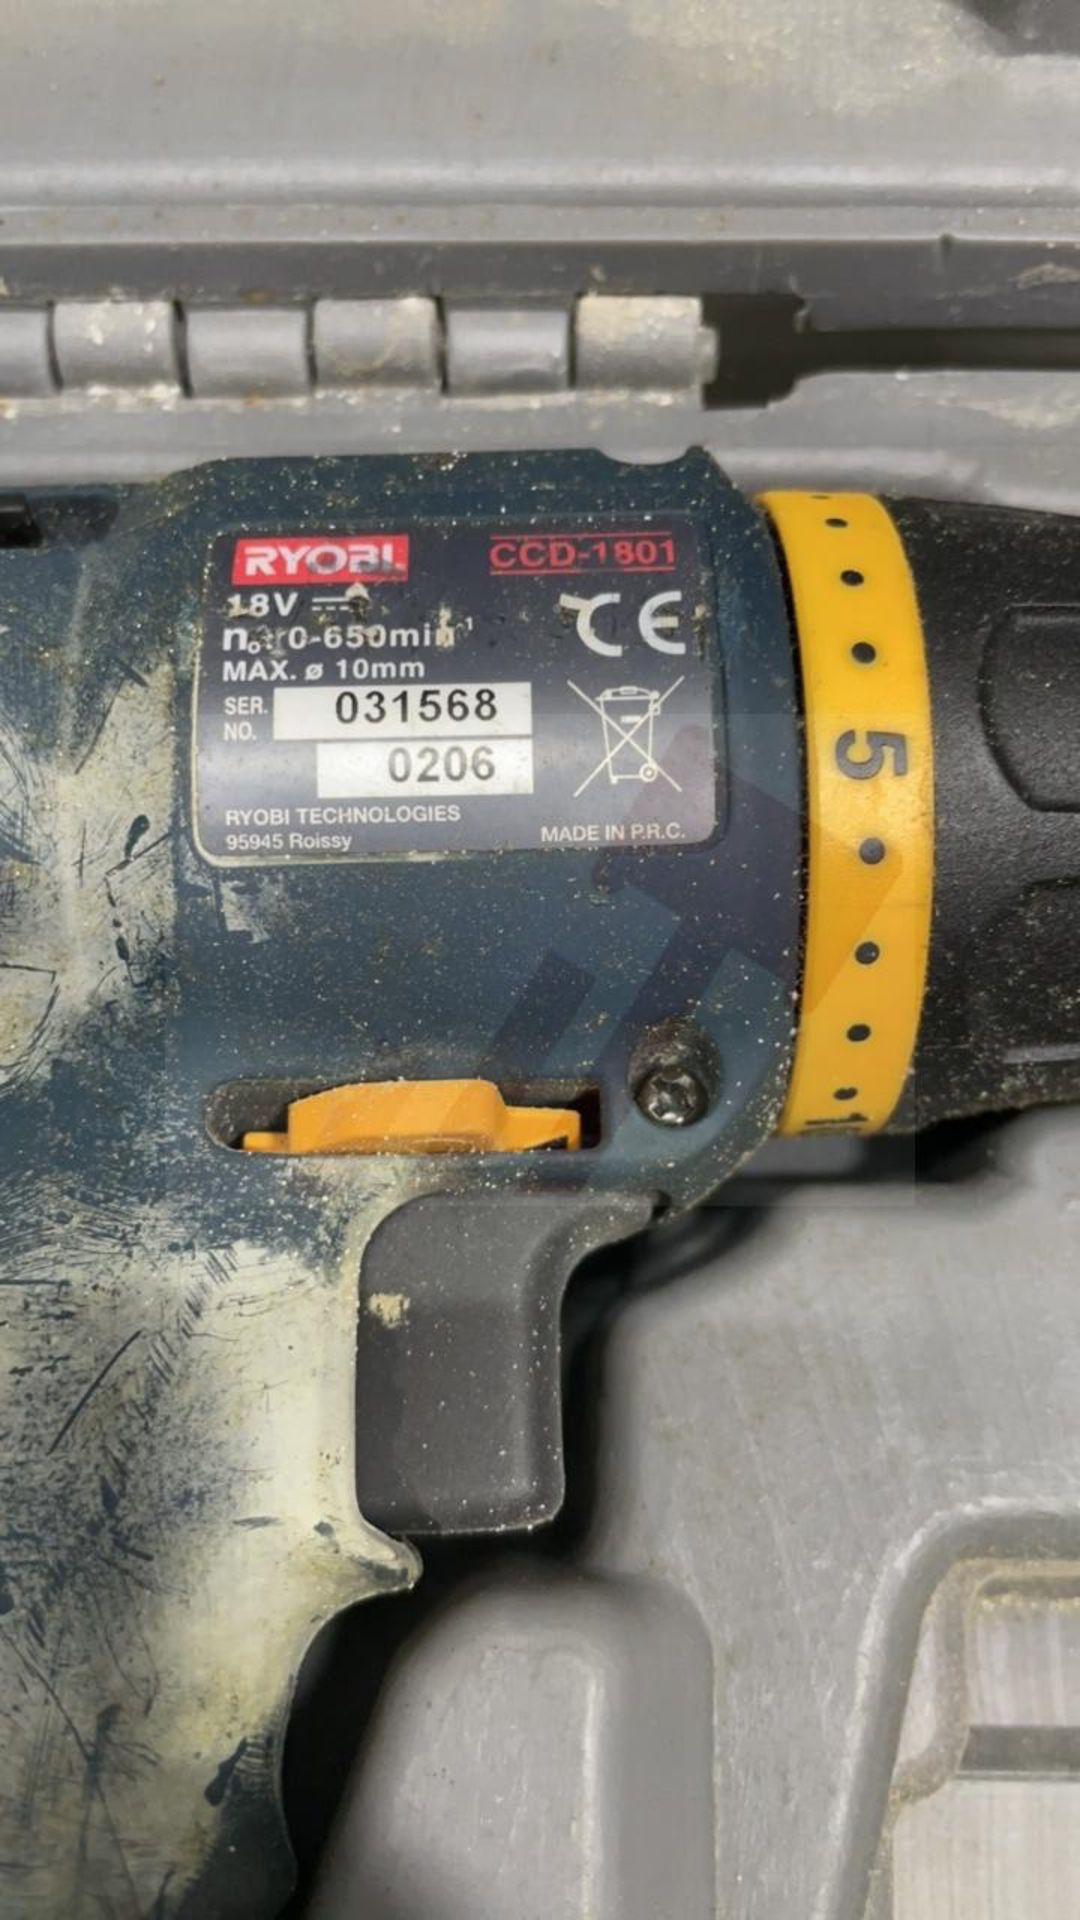 Ryobi CDI 1801 18 V Hammer Drill CCD 1801 Driver & Case | 1 battery only - Image 2 of 8